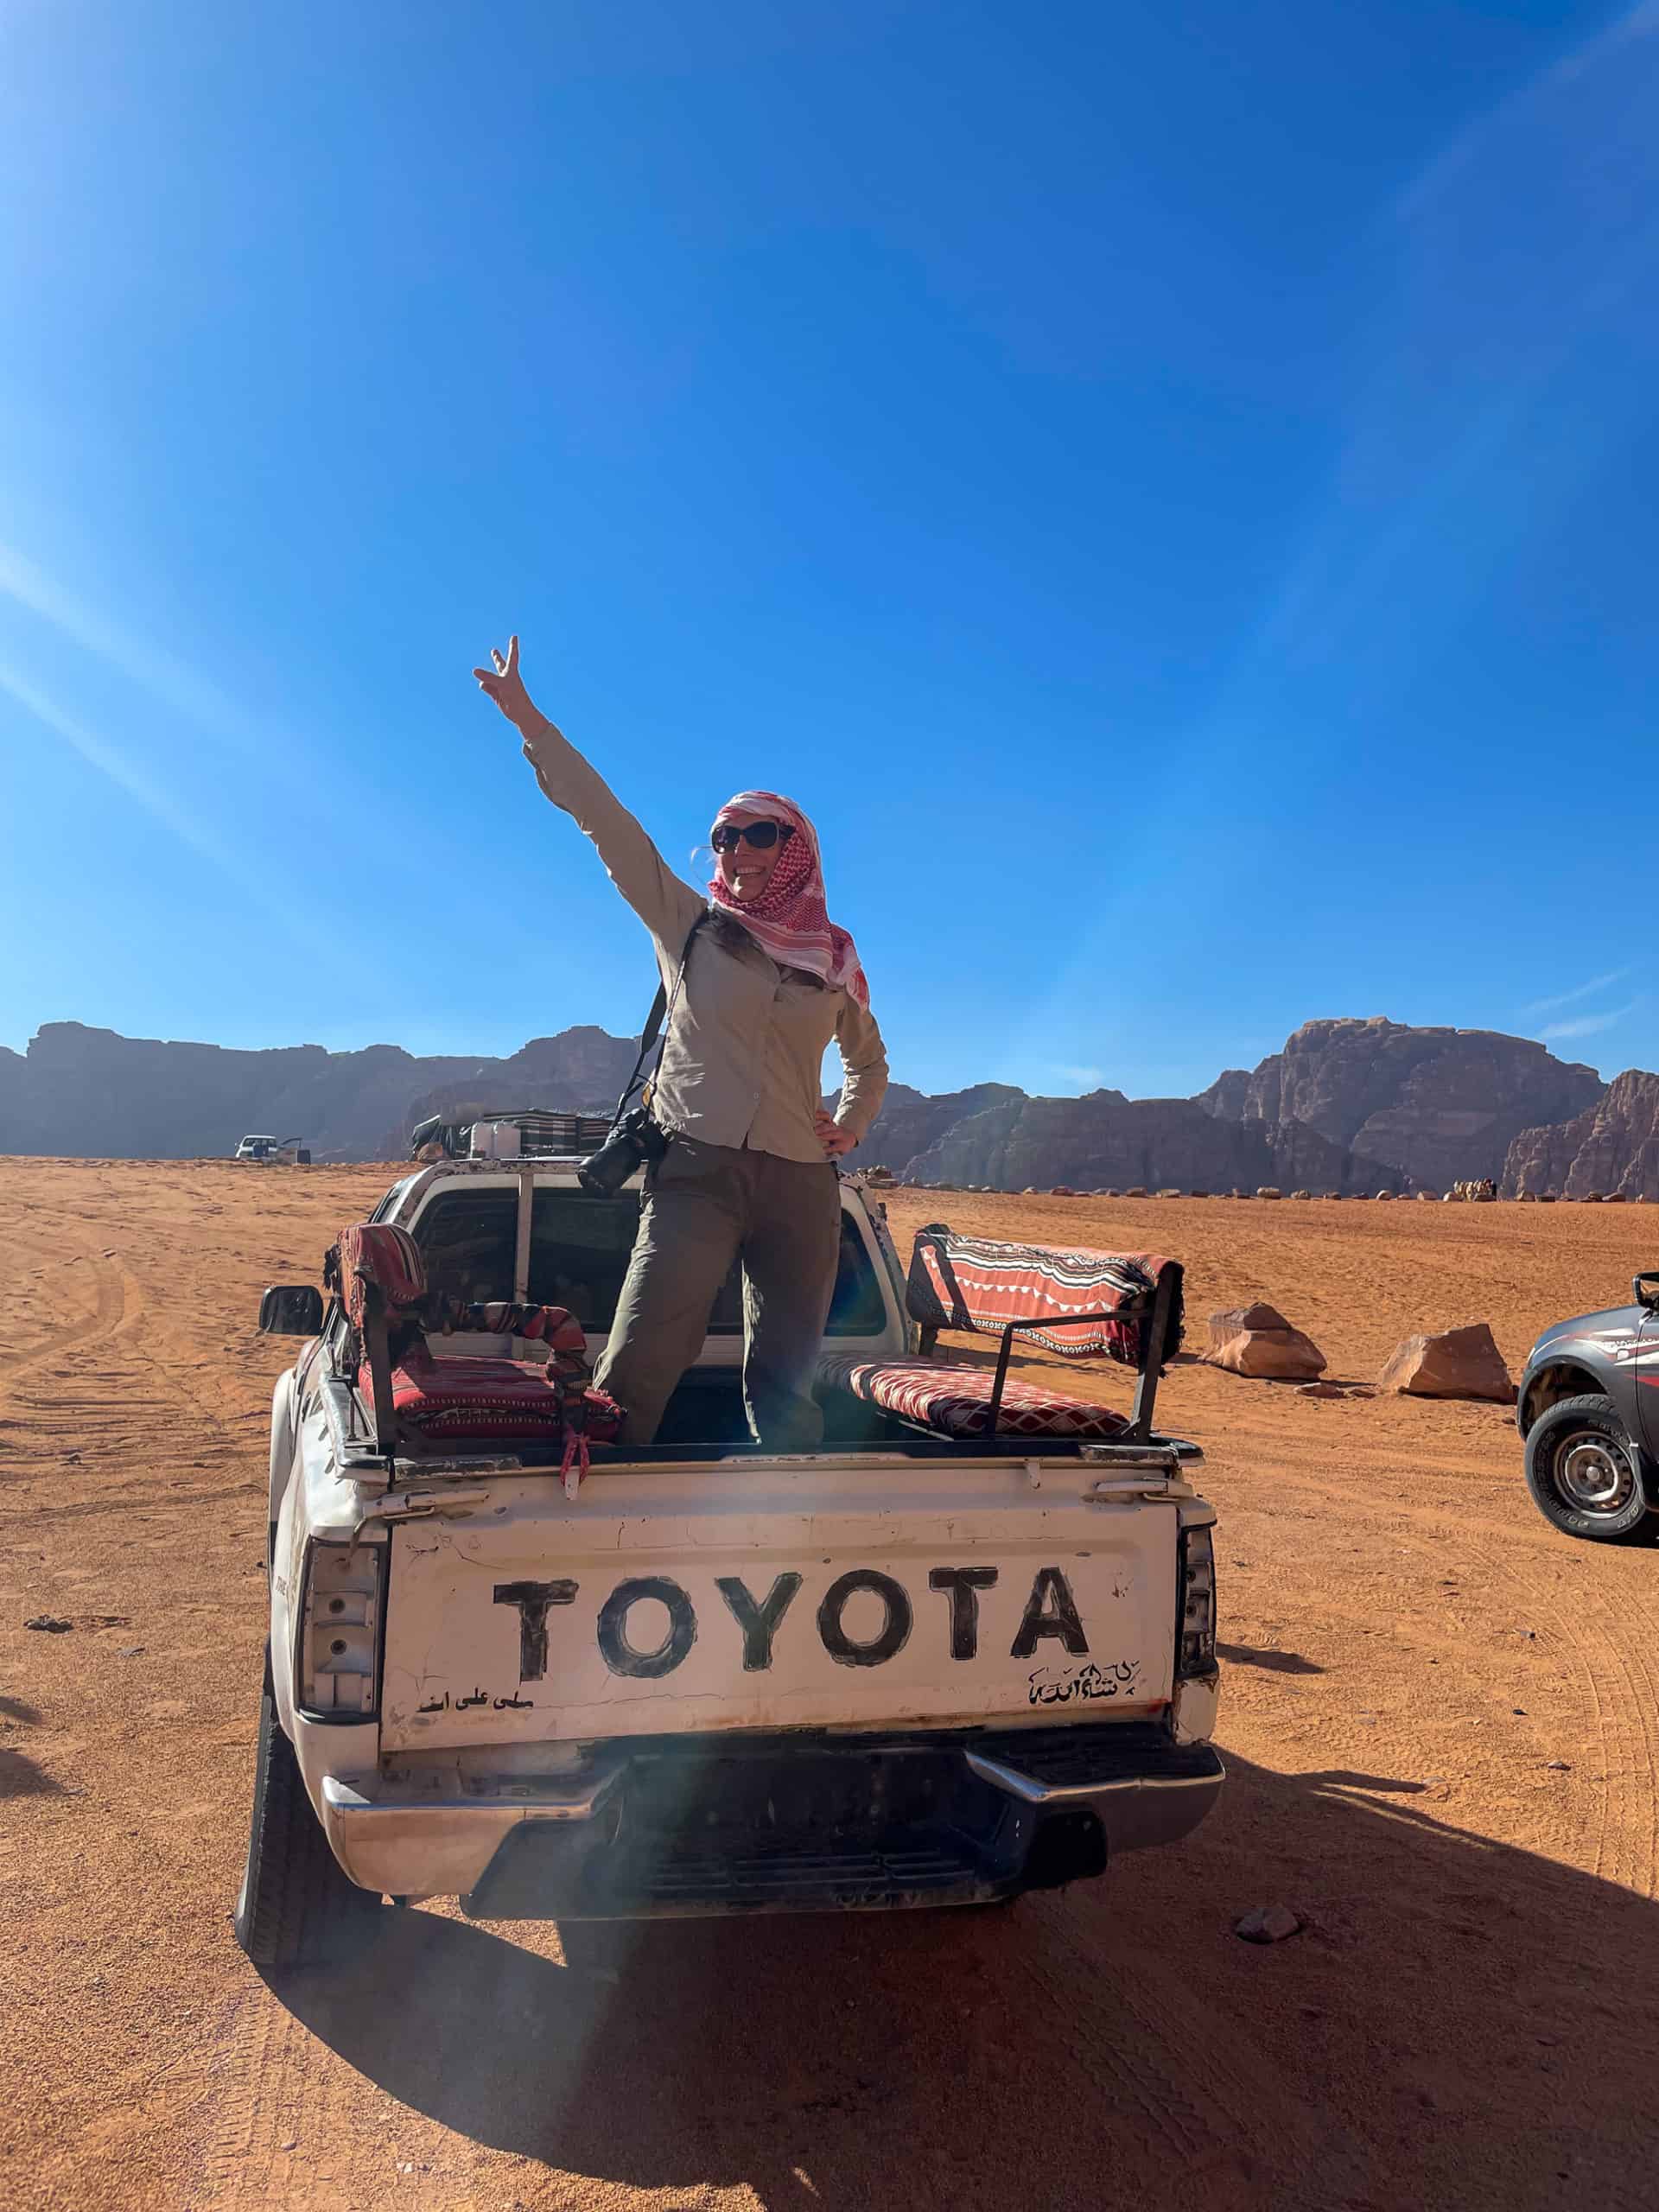 Jordan - travelling as a woman can be empowering